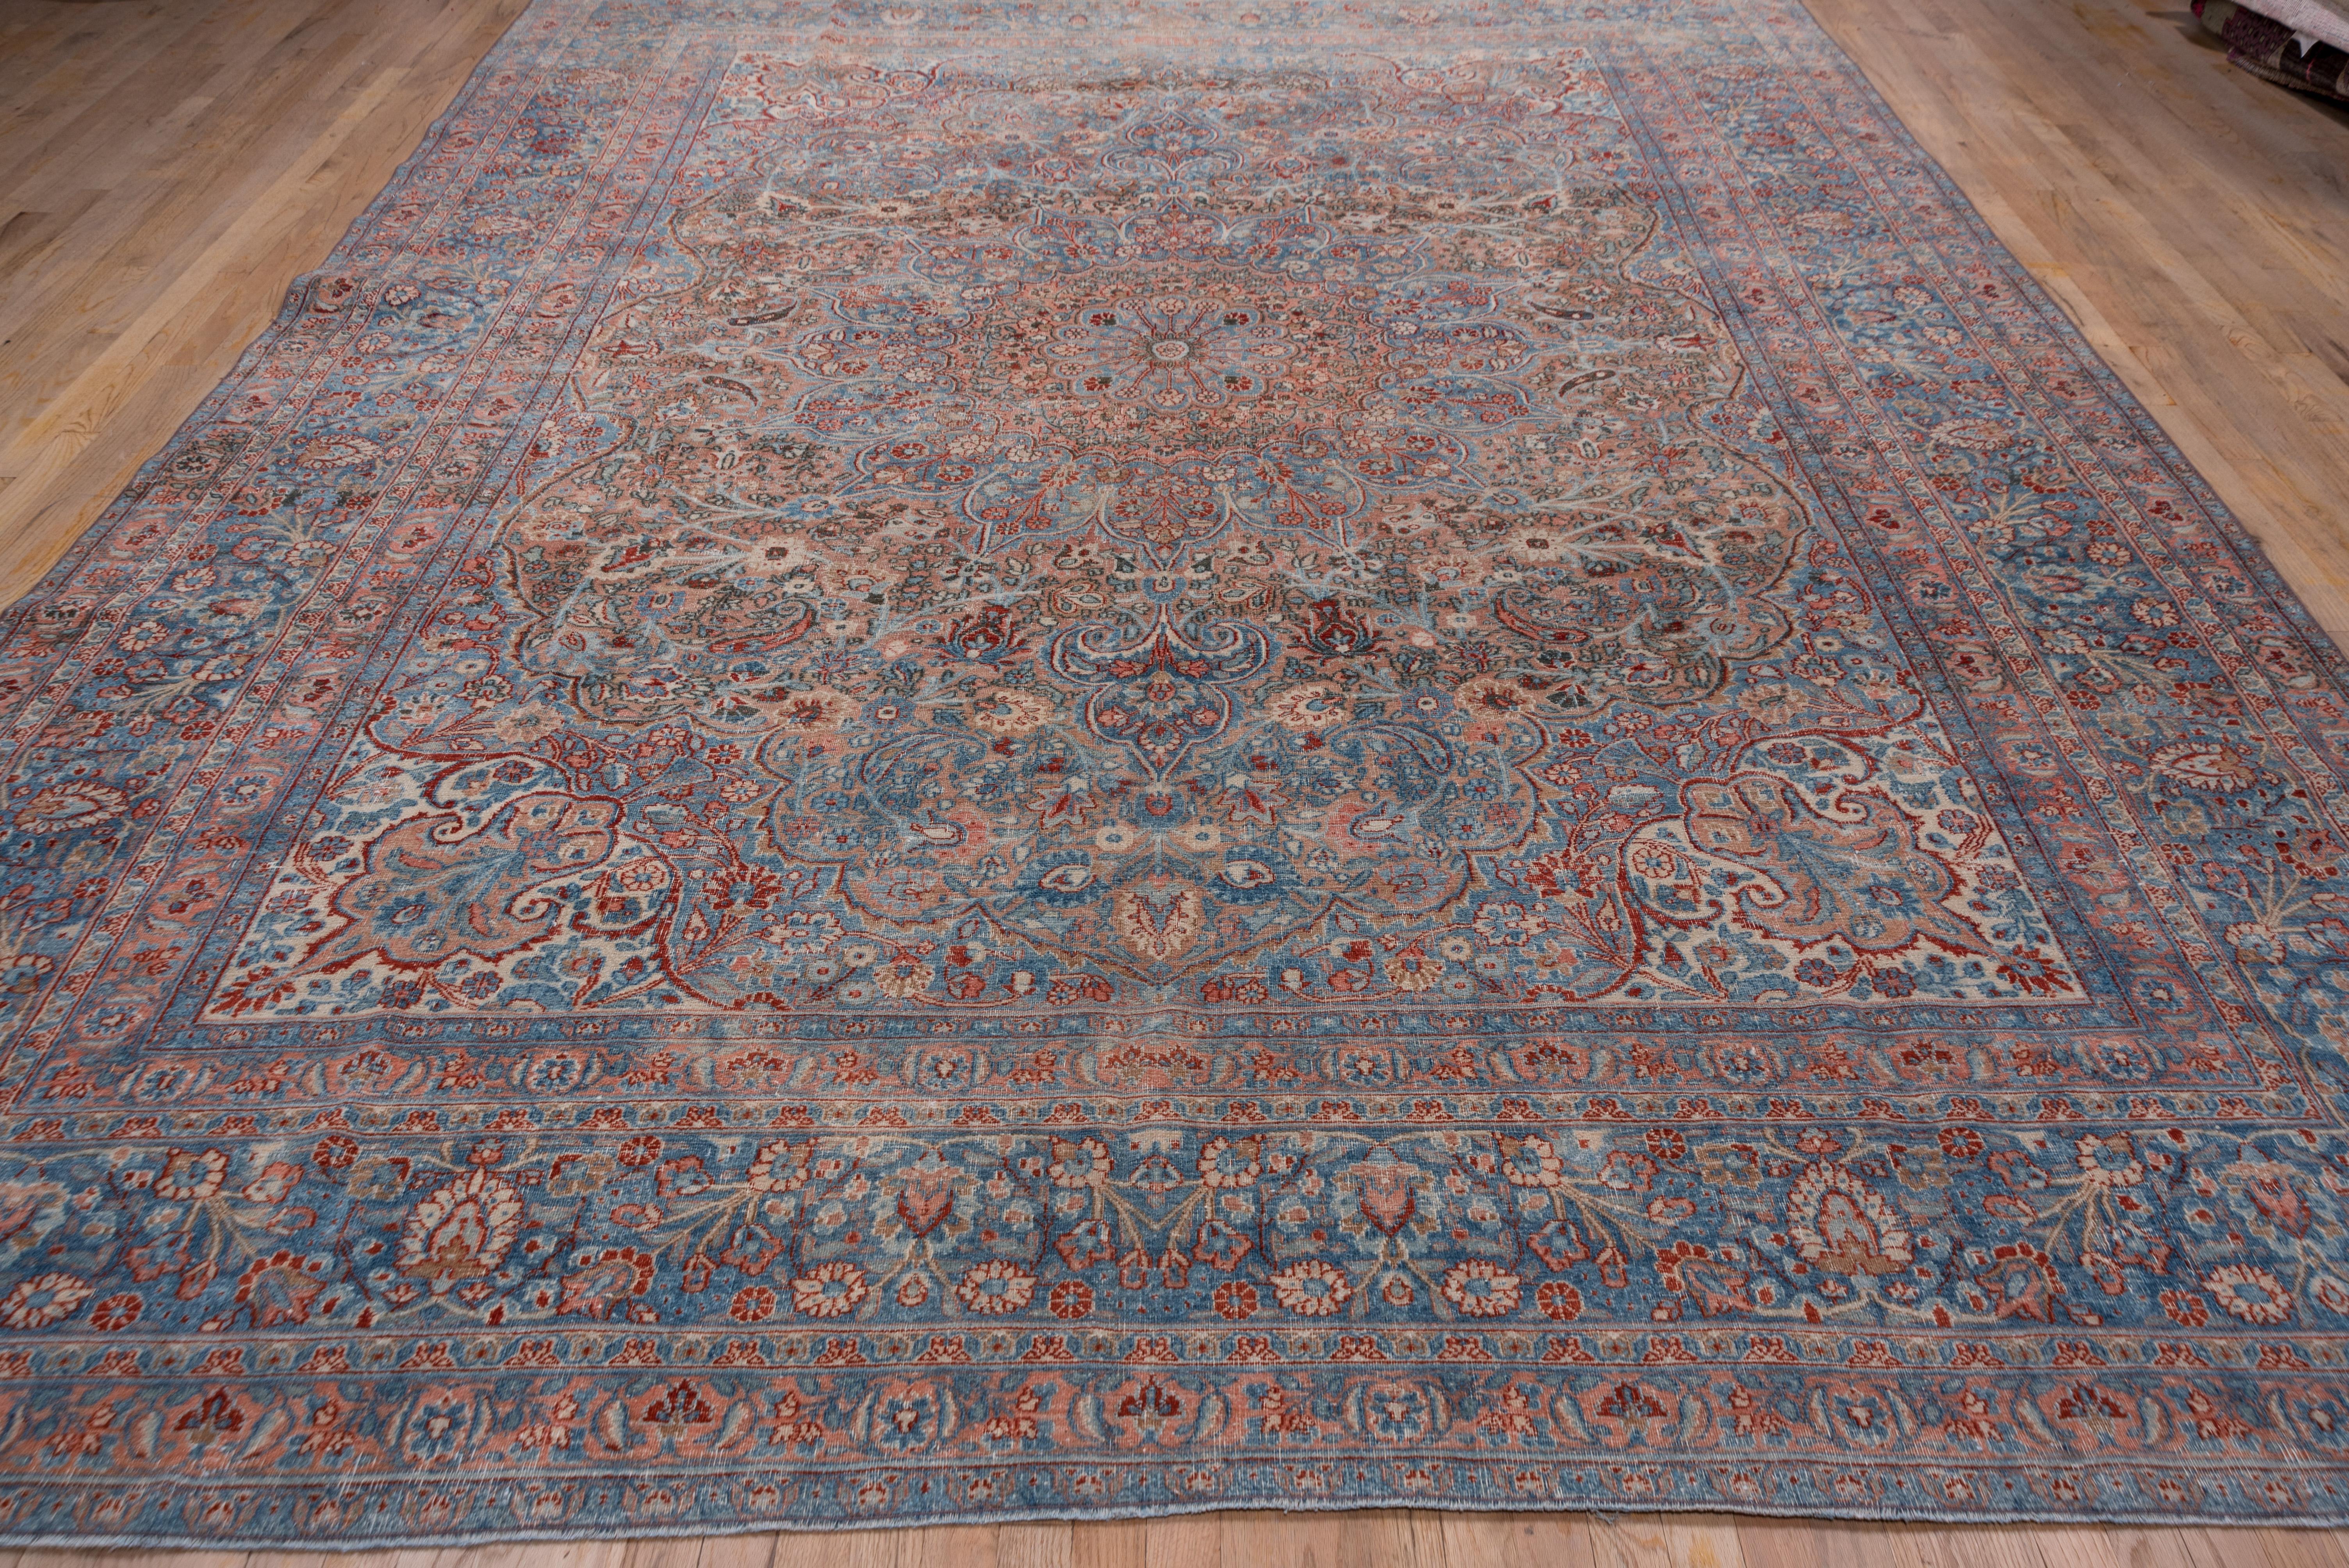 Antique Persian Khorassan Carpet, Blue Tones, Pink Tones, Salmon Tones In Good Condition For Sale In New York, NY